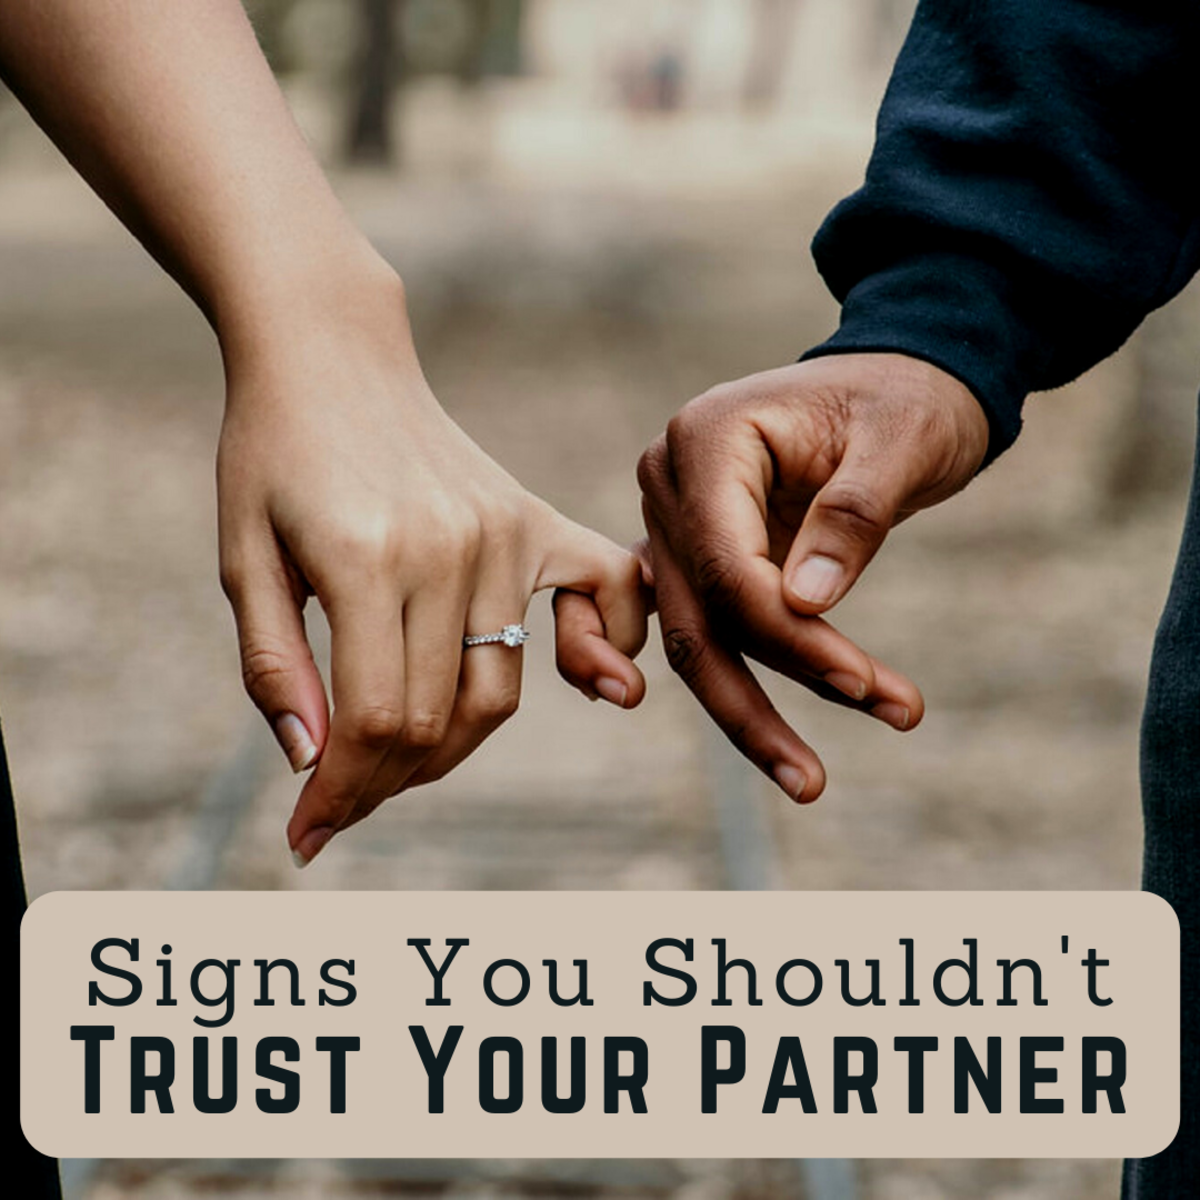 What are some signs that your partner isn't trustworthy? Read on to find out.